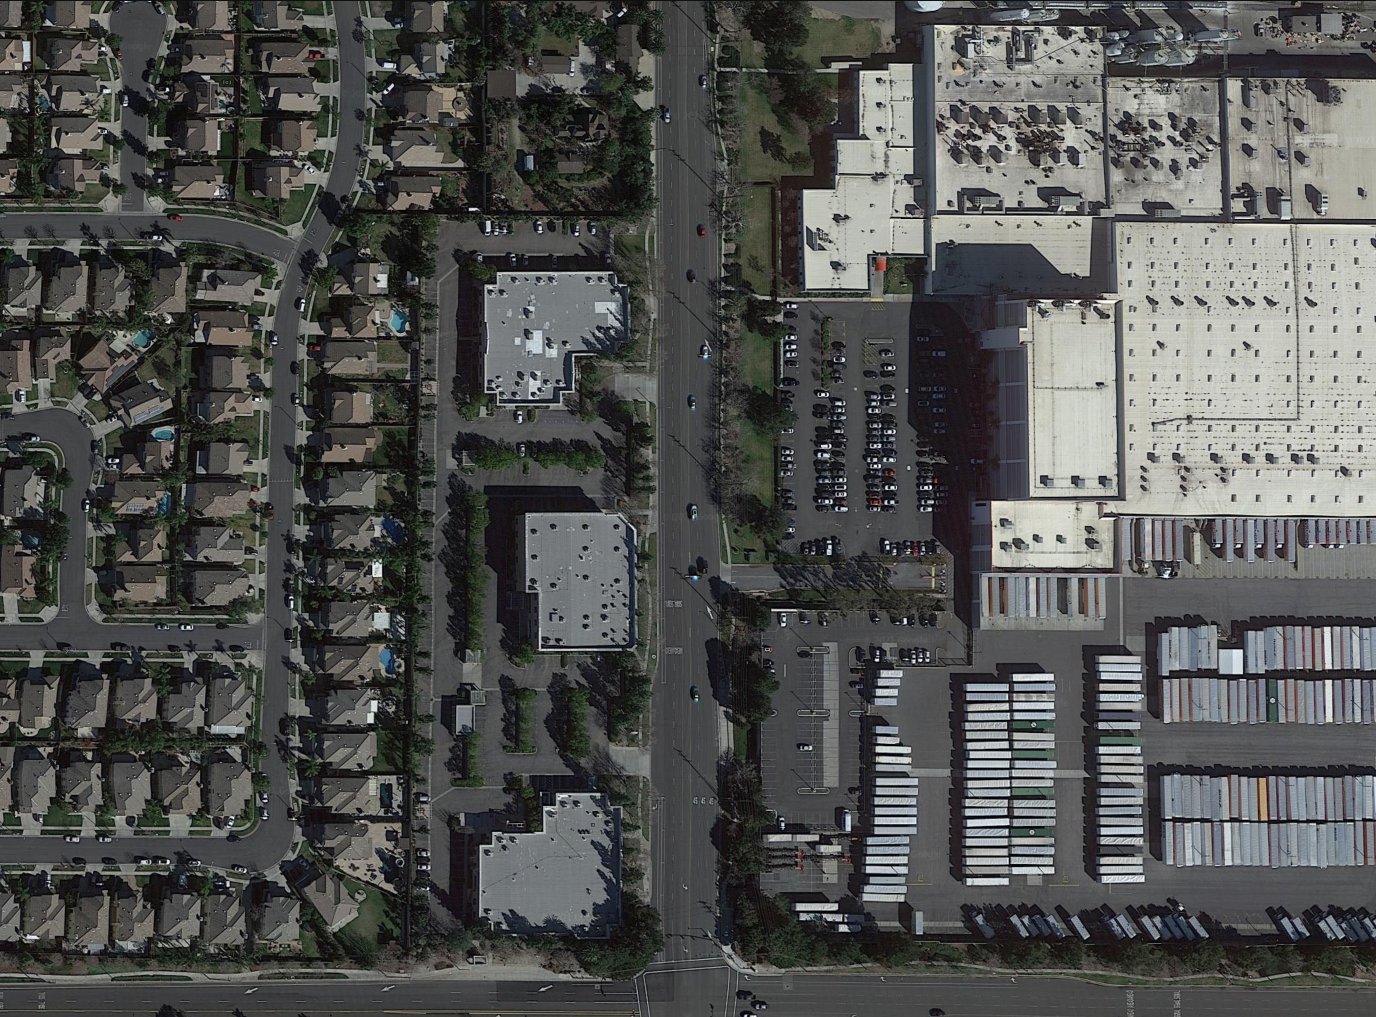 A top-down satellite's view of a warehouse and container yard. A residential neighborhood sits just across a wide street.